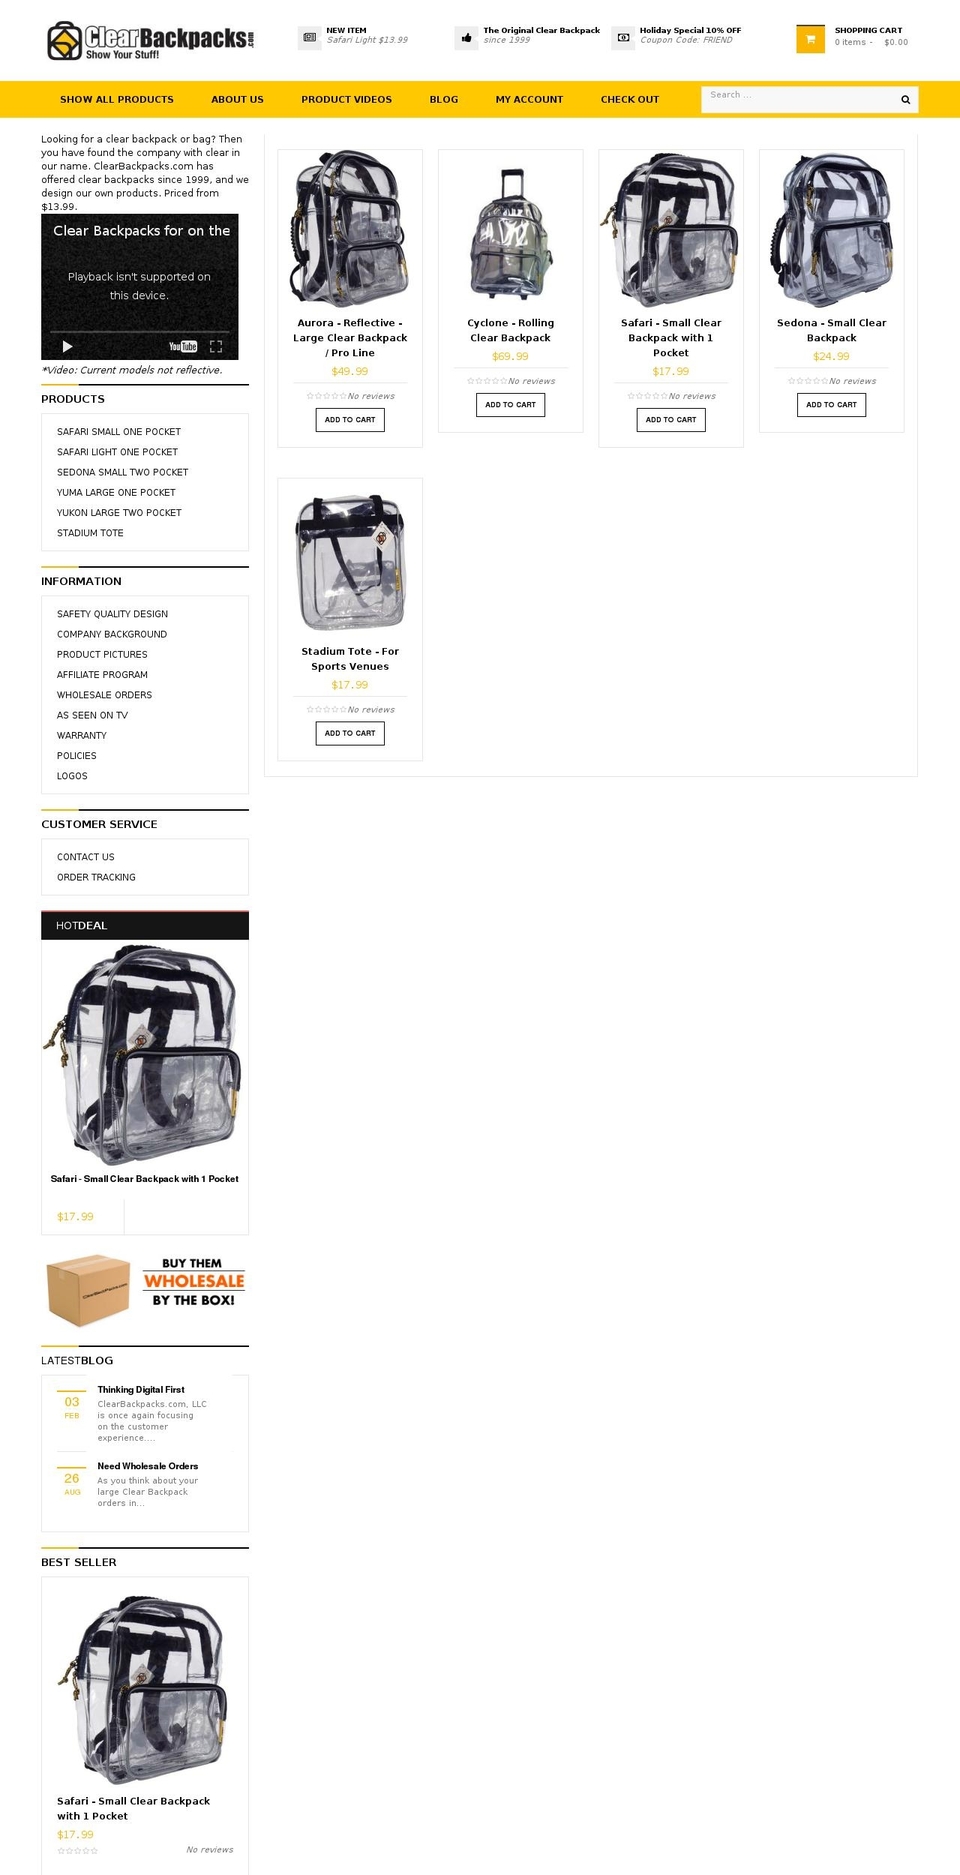 Fashion Shopify theme site example clearbackpacks.com